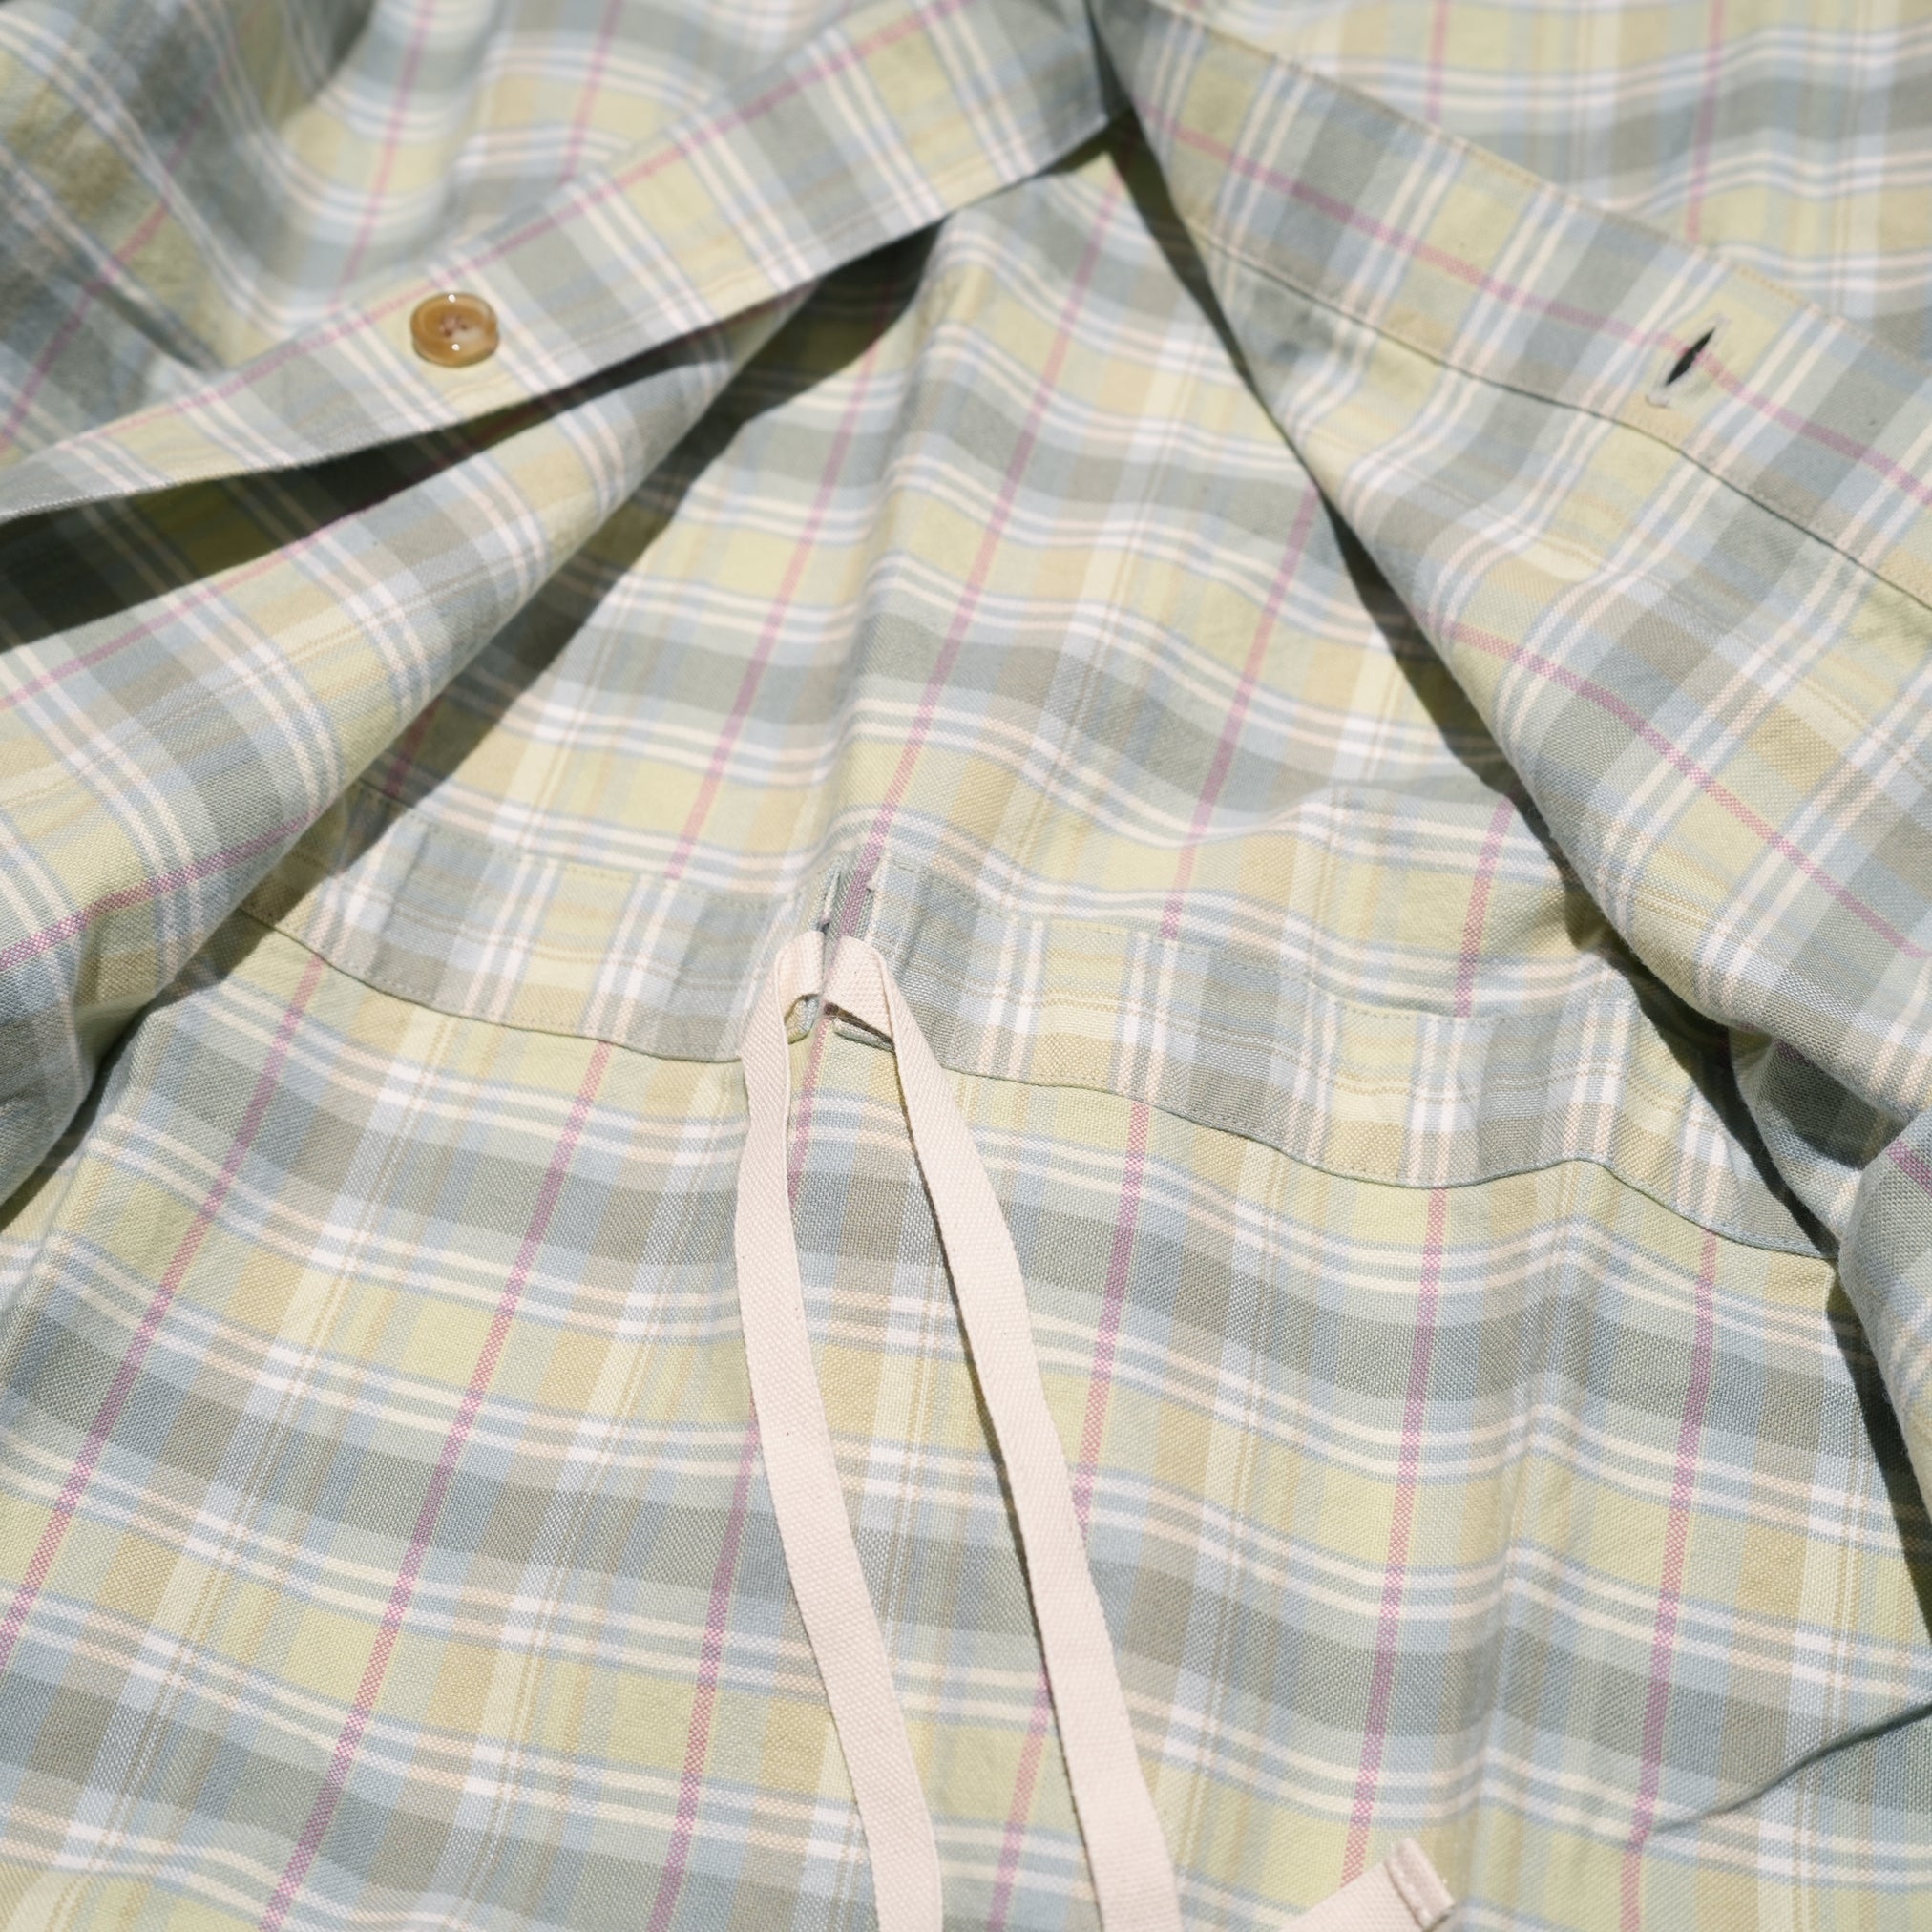 Name: E-Z GOING SHIRTS | Color:Pistachio Plaid | Size:Regular/Tall 【CITYLIGHTS PRODUCTS_シティライツプロダクツ】